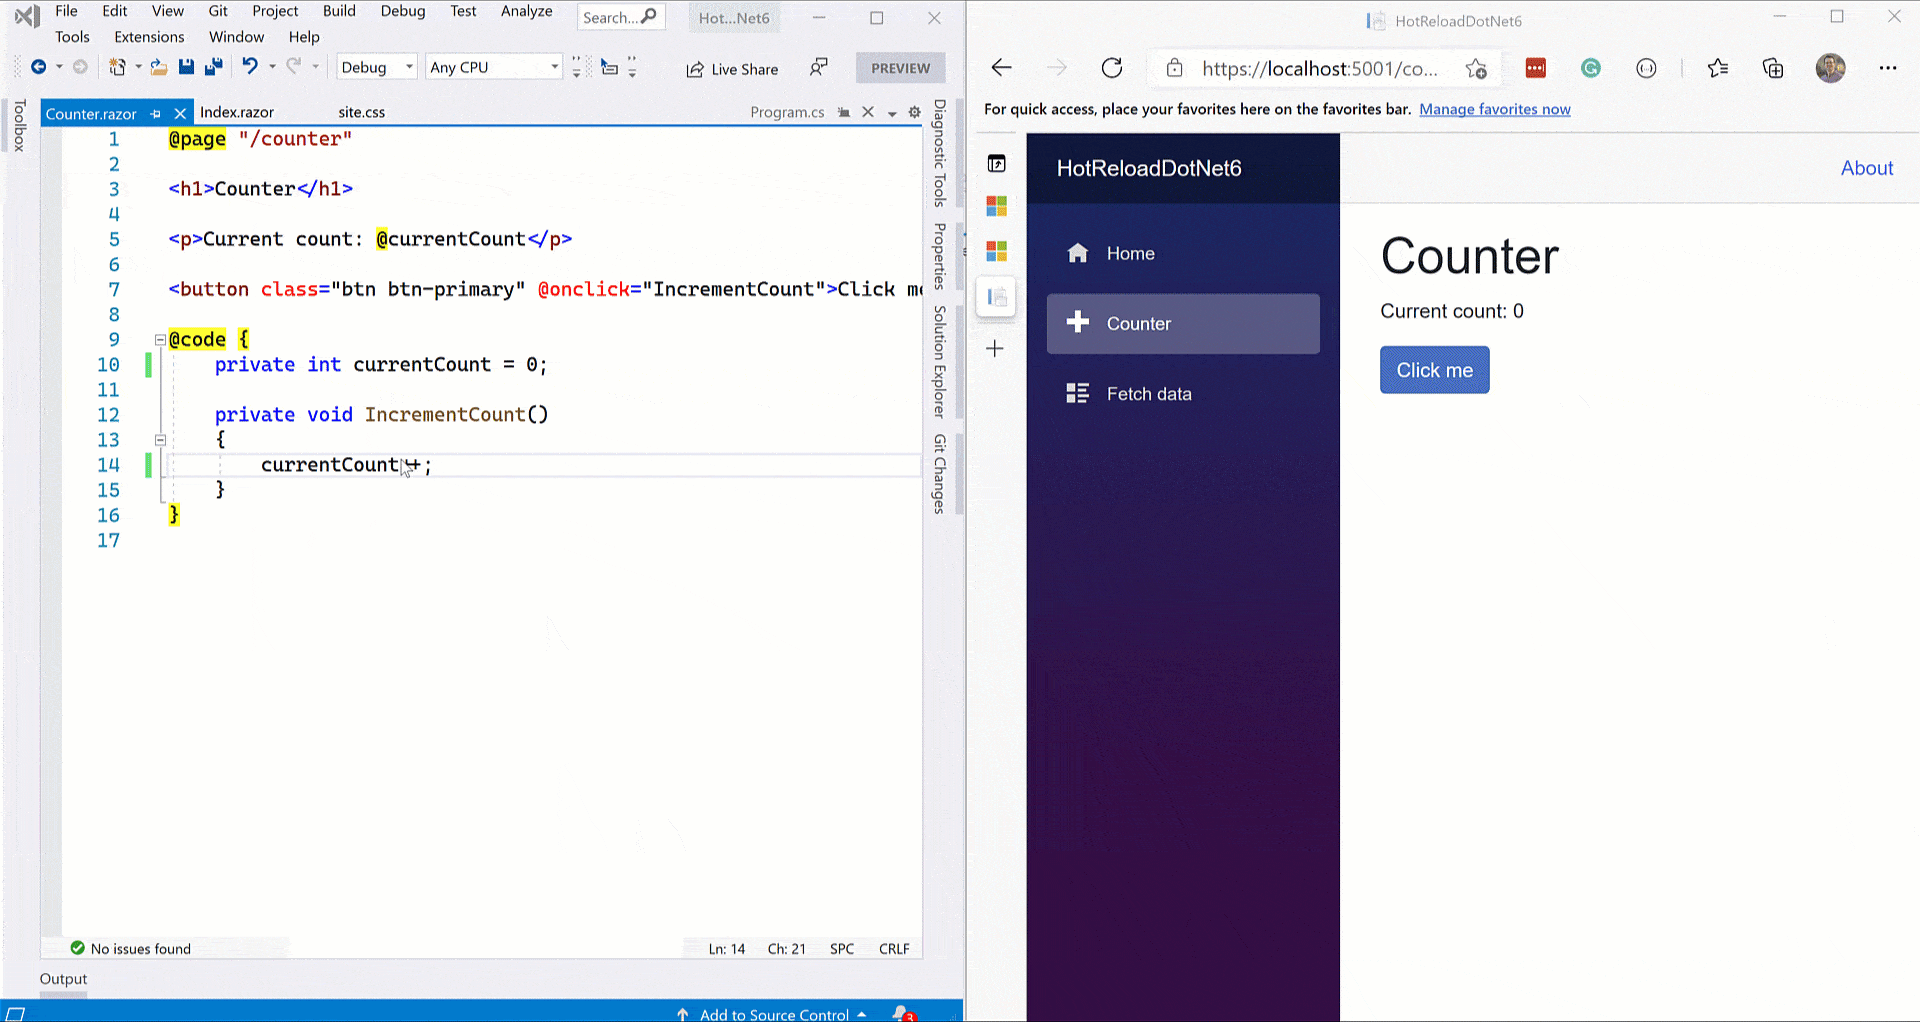 When I resolve my error, a rebuild occurs. Removing the mistyped s on currentCounts brings up a busy indicator on the browser for about one second, and then the page is reloaded.